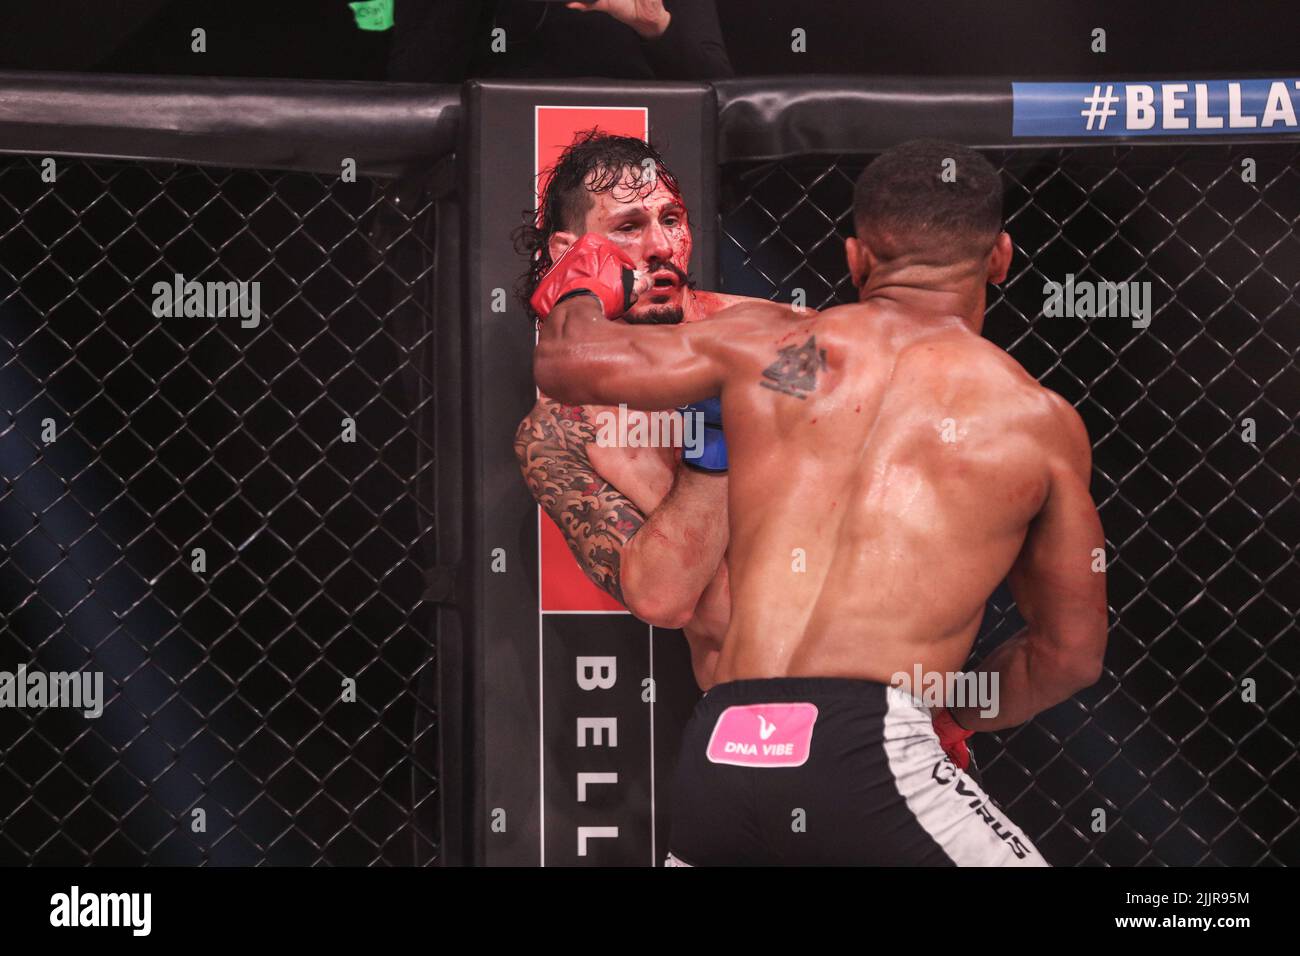 Archie Colgan attacking Bryan Nuro at Bellator 283. Archie Colgan defeats Bryan Nuro by way of knock out in the 3rd round from the Emerald Queen Casin Stock Photo